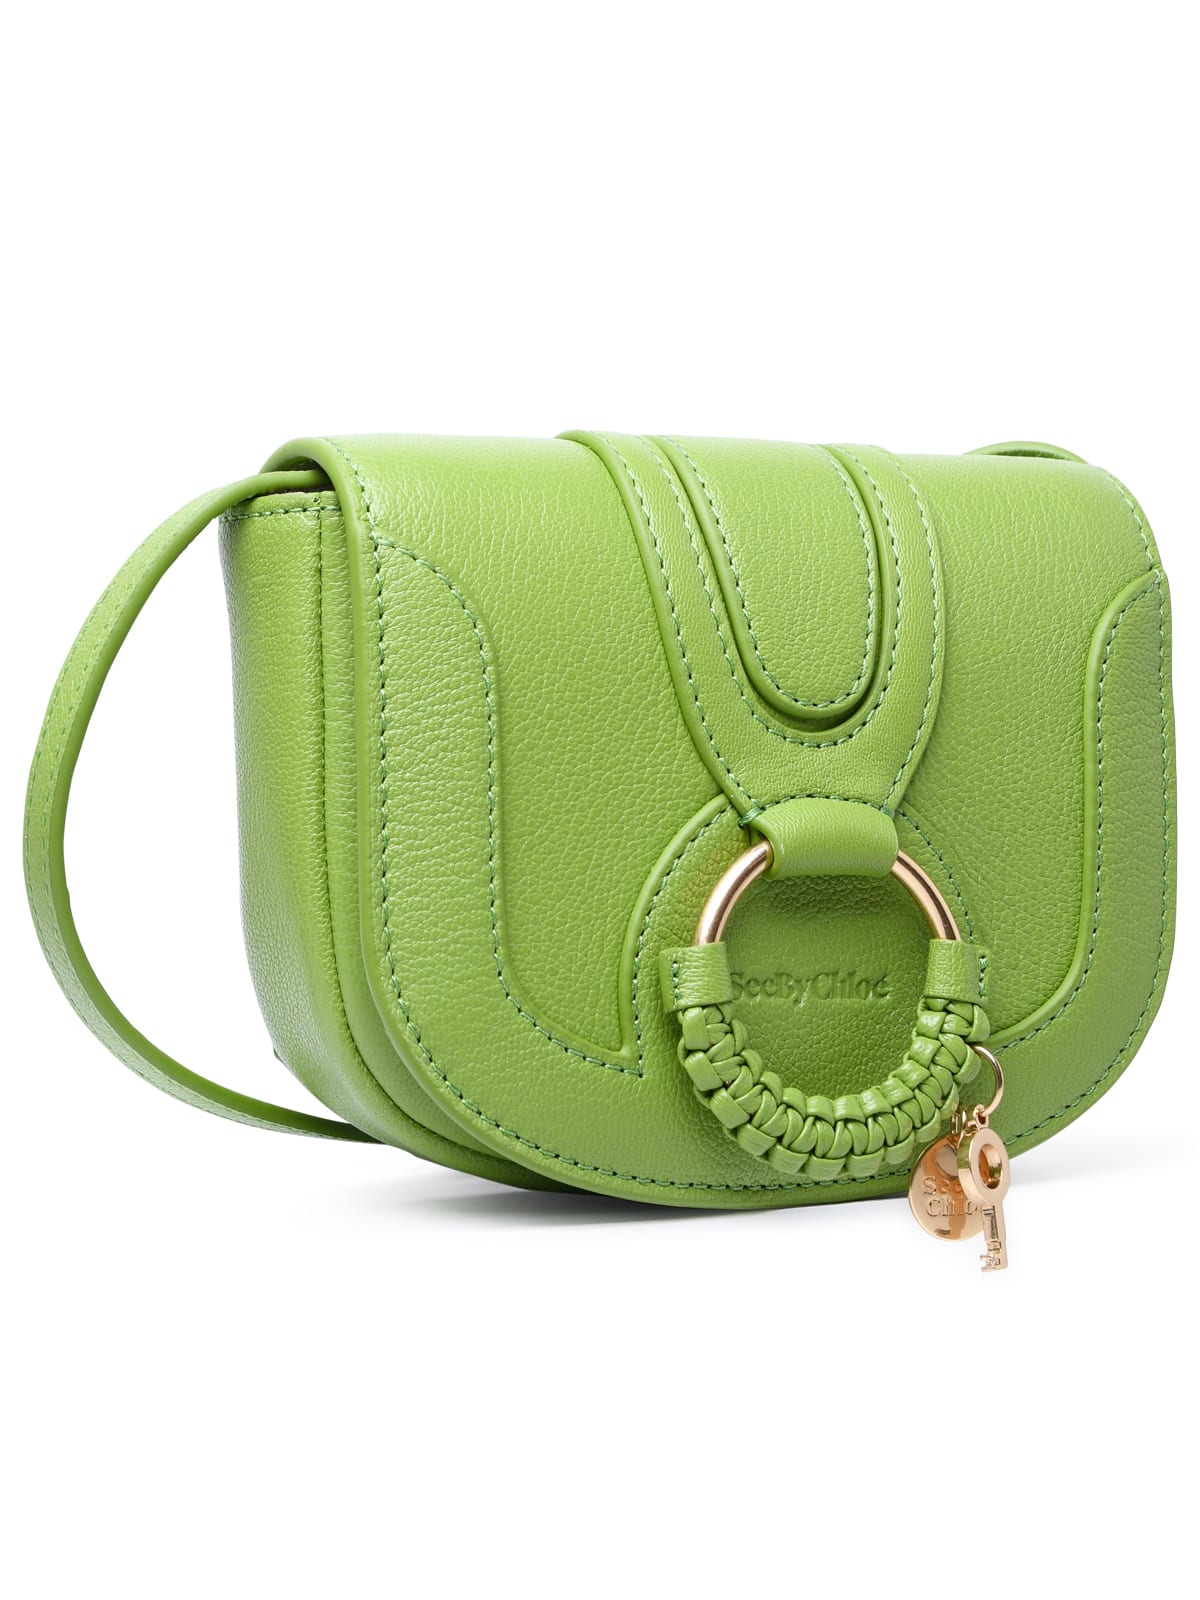 Shop See By Chloé Small Hana Green Leather Bag